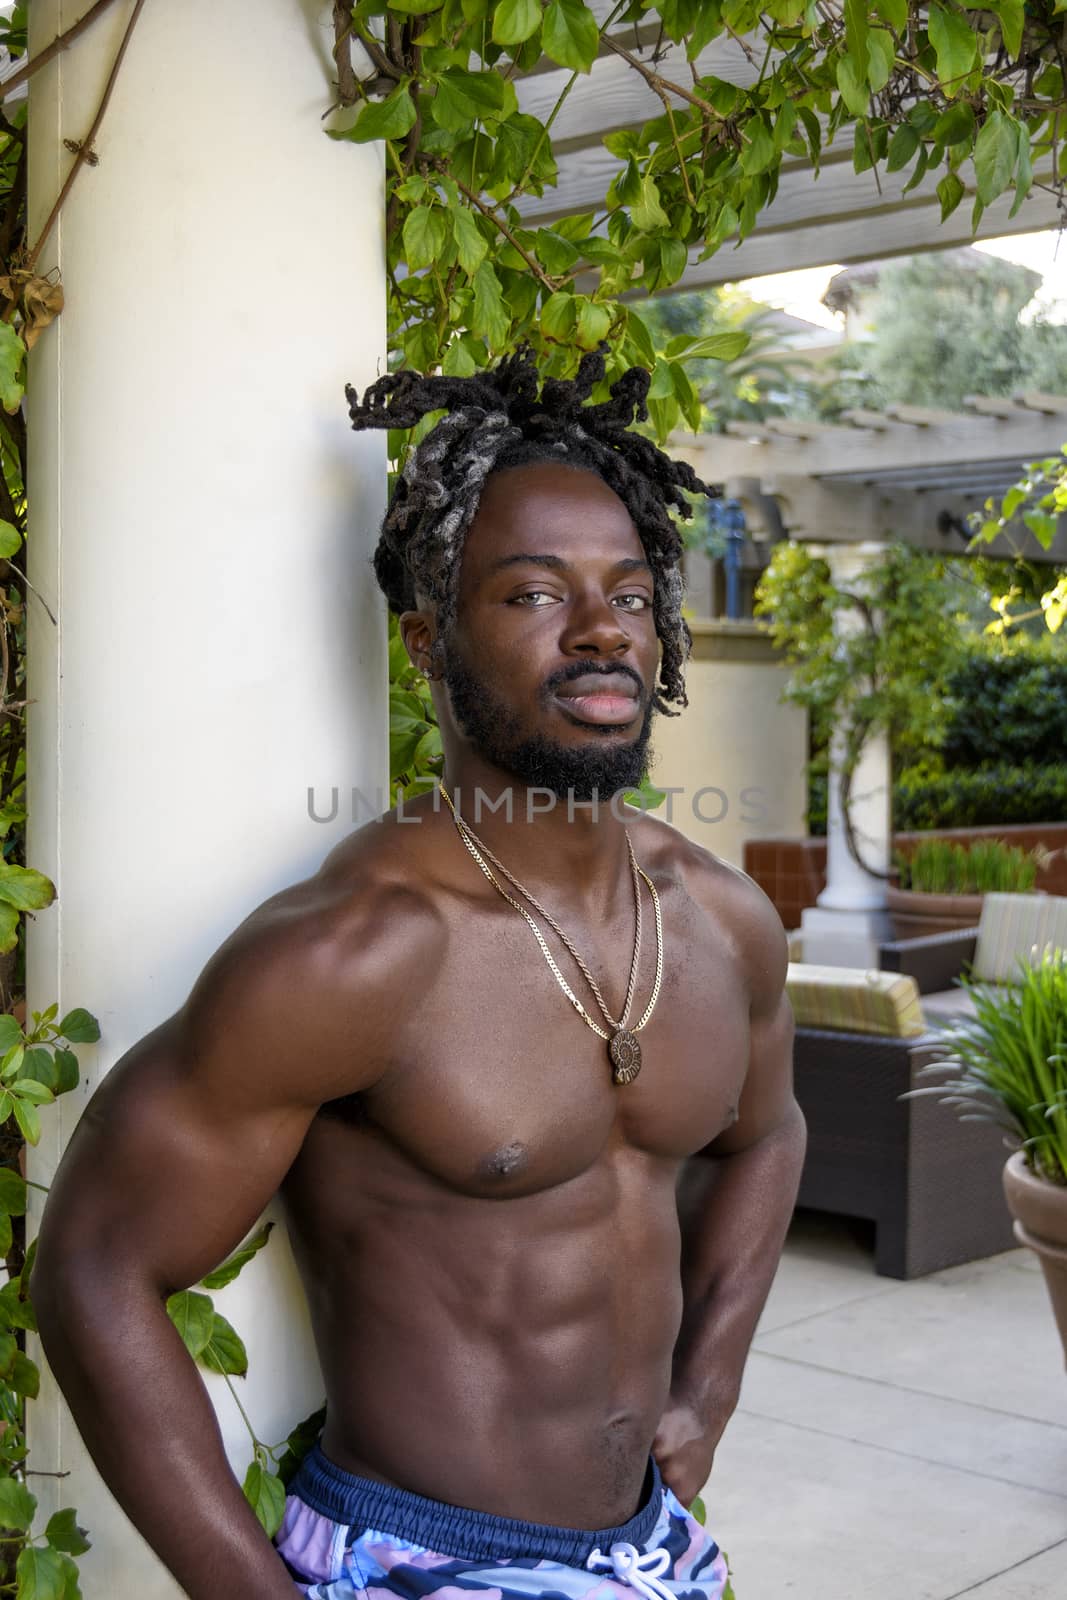 Handsome young muscular African American man posing shirtless outside.